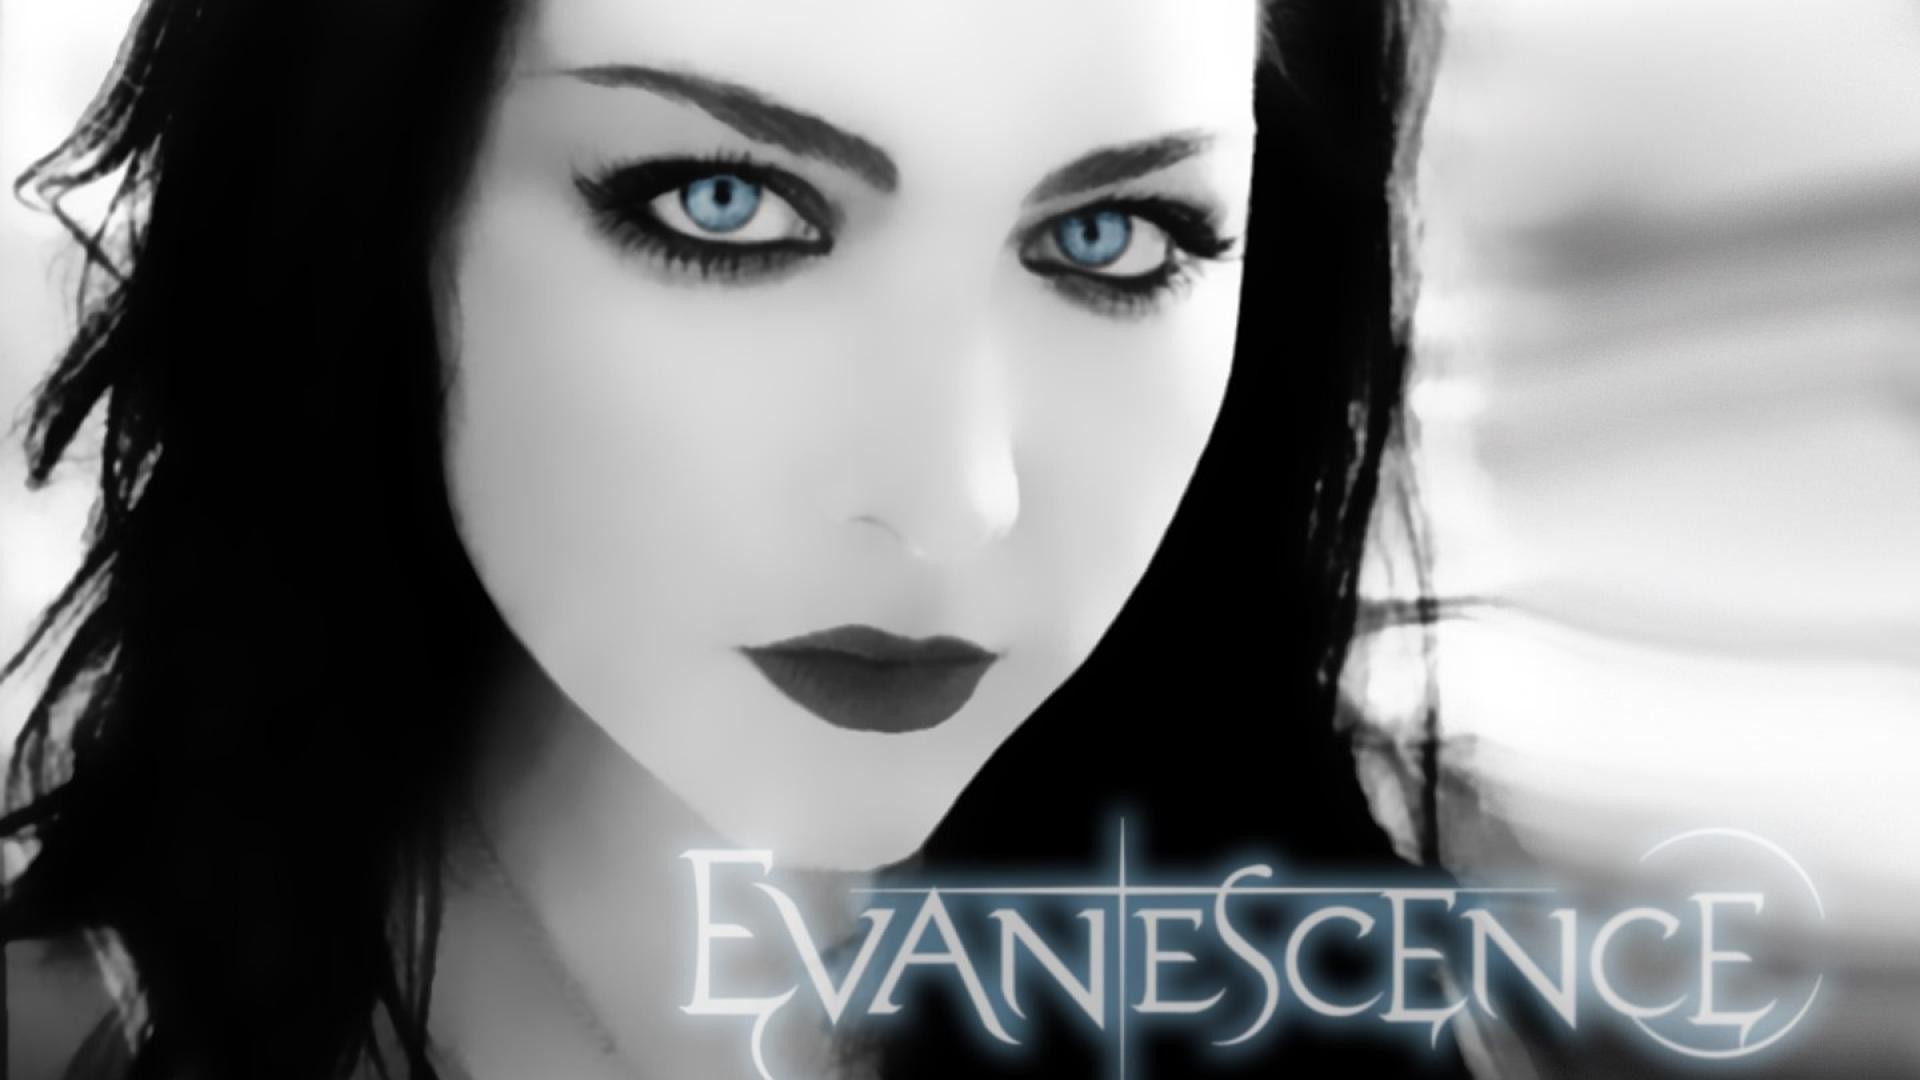 1920x1080 Artist Amy Lee of Evanescence wallpapers and images - wallpapers, pictures,  photos